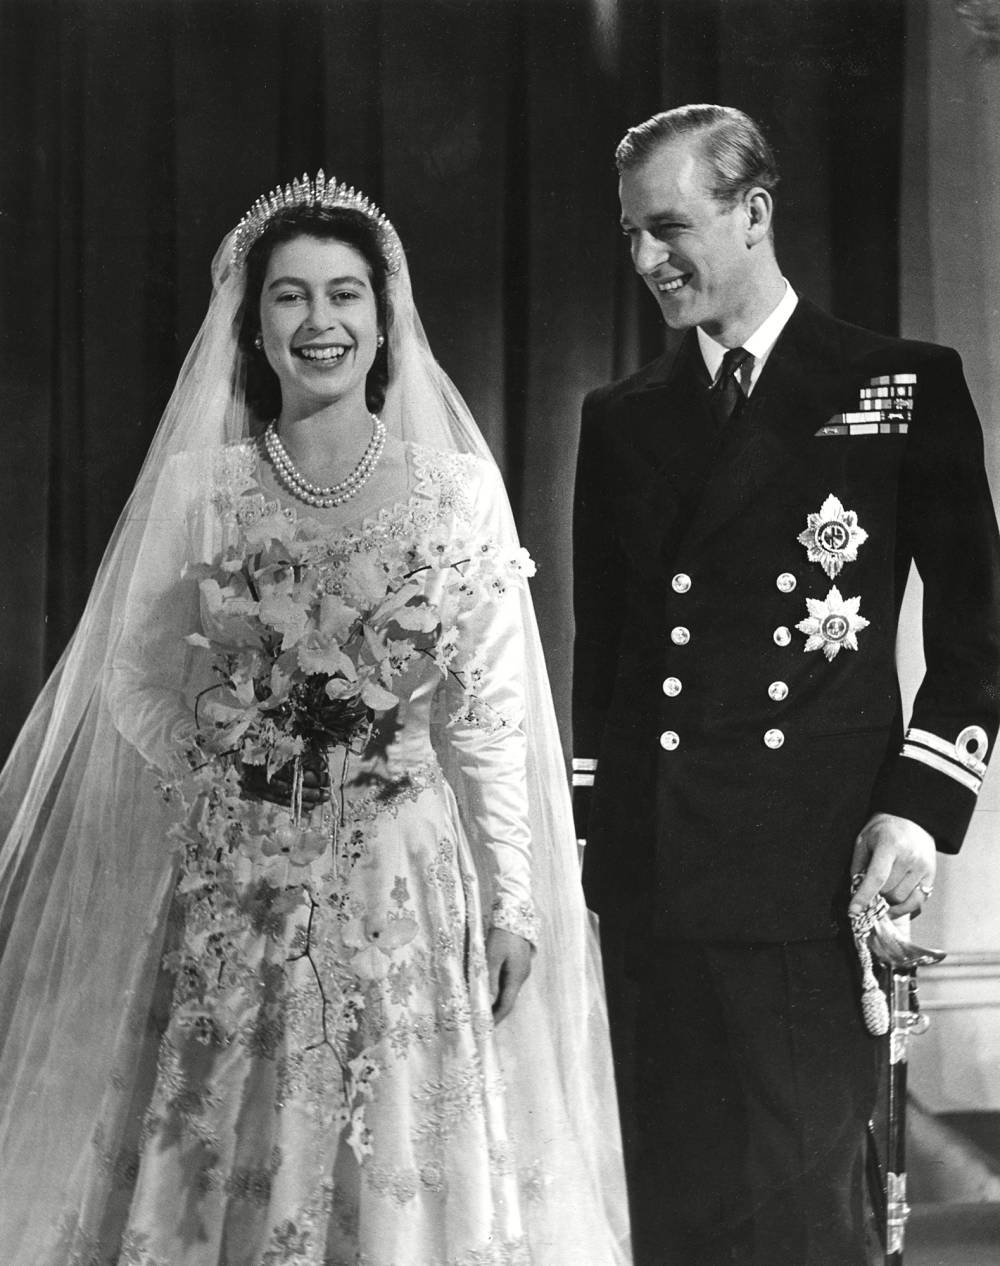 Queen Elizabeth II’s Funeral Takes Place at Same Chapel Where She Had Coronation and Married Prince Philip 